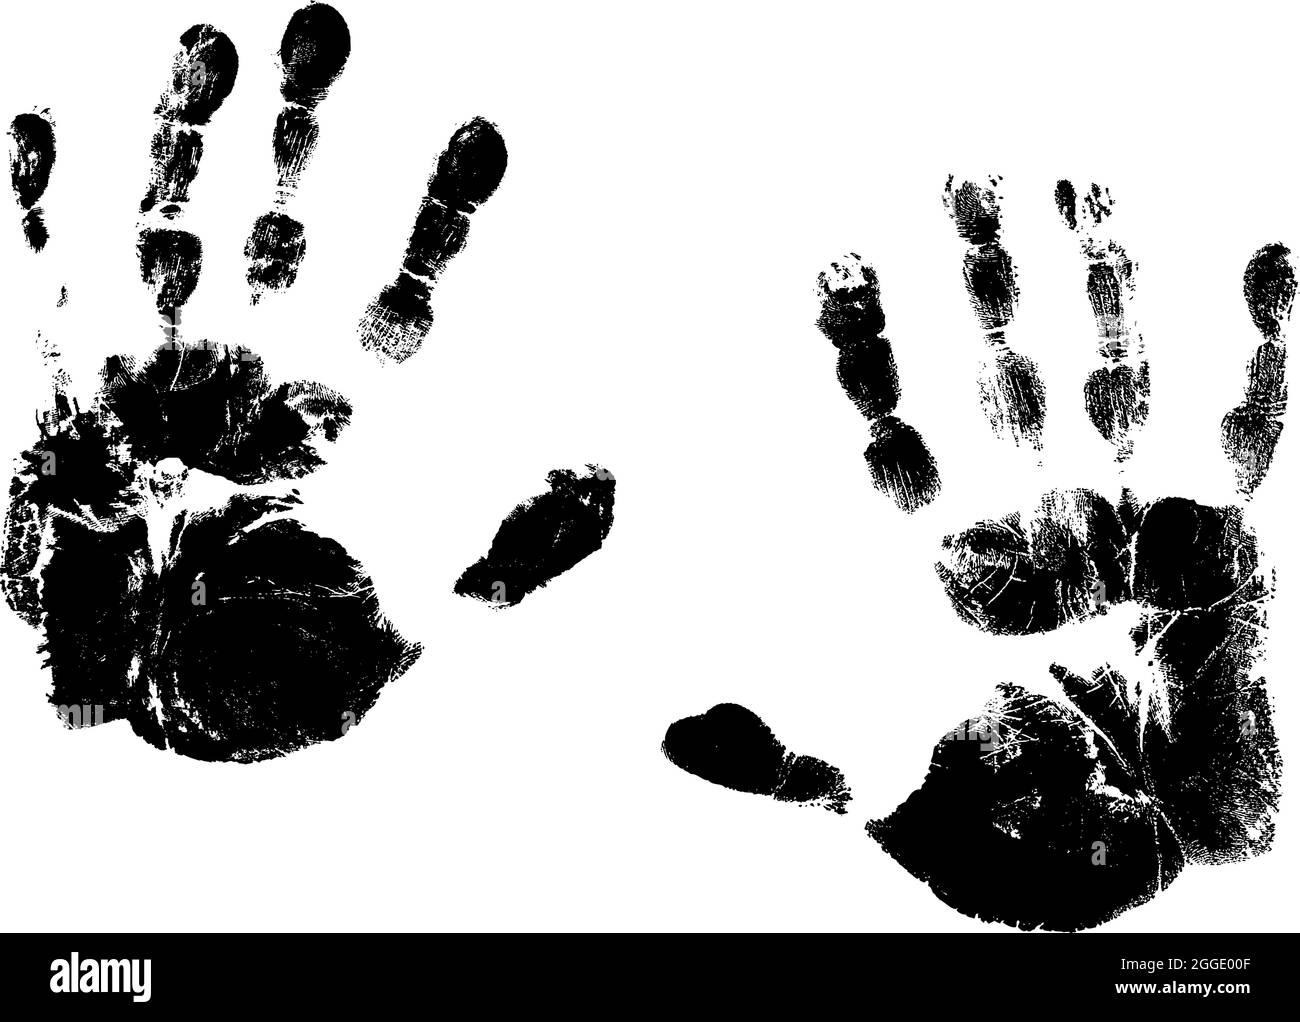 handprint, images of the footprint of hands on a white background for printing prints, flyers, banners Stock Vector